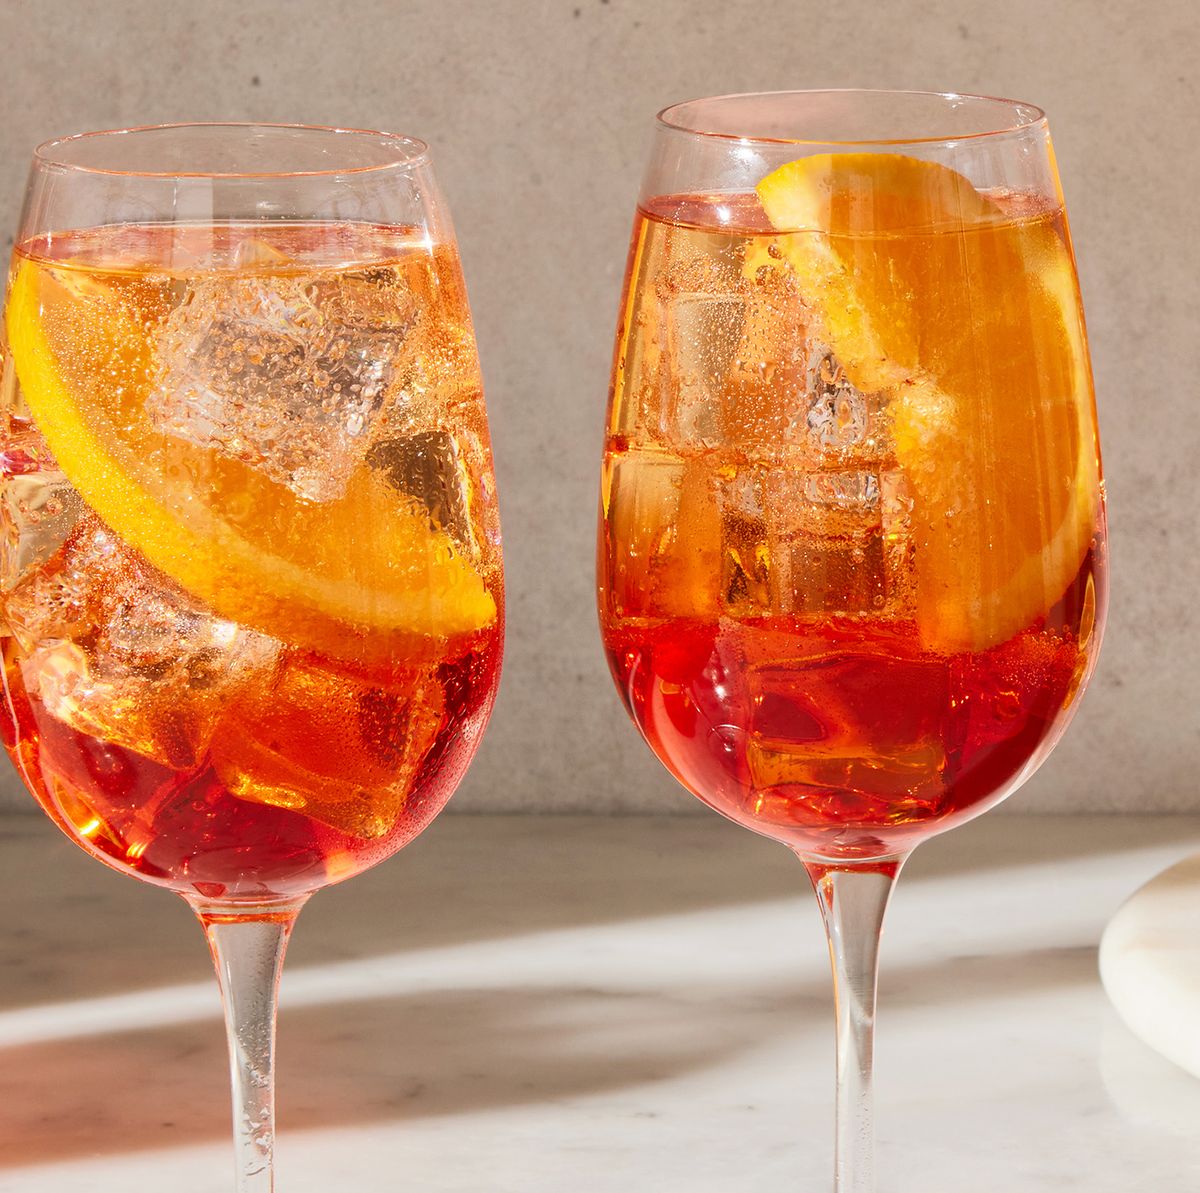 How to Make the Best Aperol Spritz Recipe